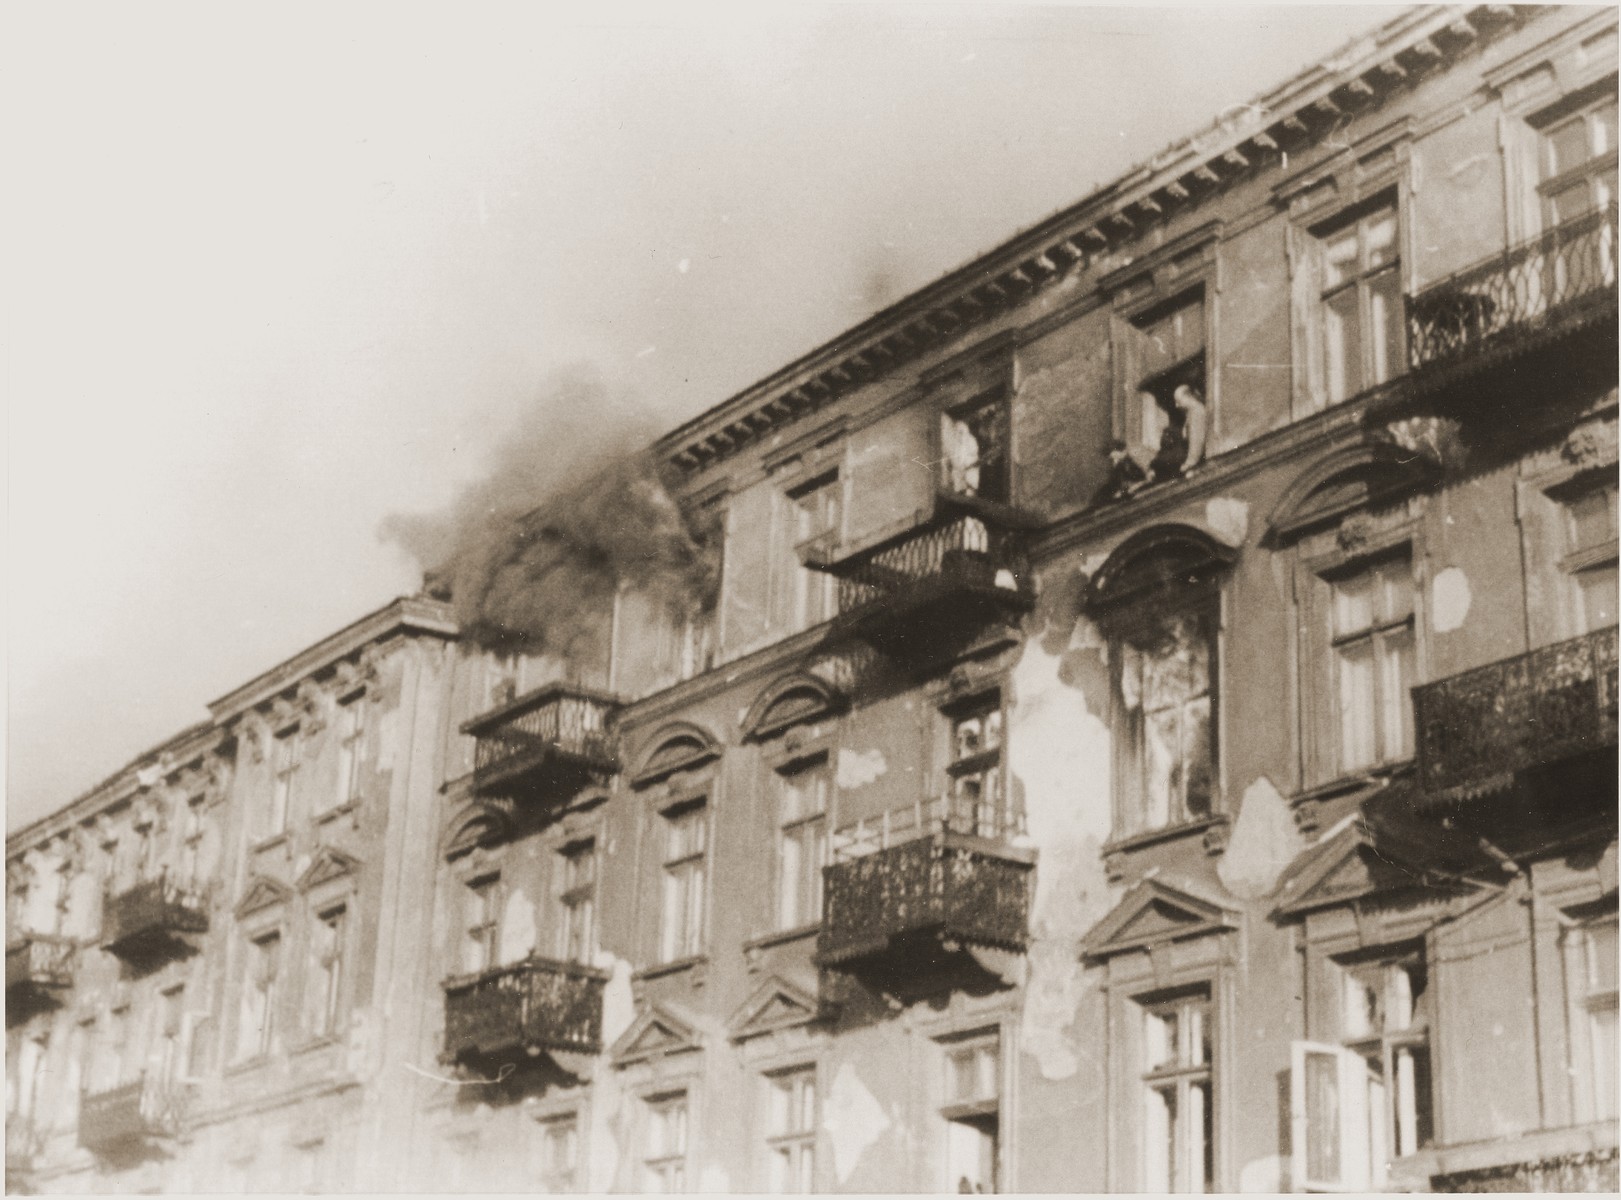 A man perched on the ledge outside of a fourth story window prepares to commit suicide by jumping rather than be captured by the SS on the fourth day of the suppression of the Warsaw ghetto uprising.  The original German caption reads: "Bandits jump to escape arrest."